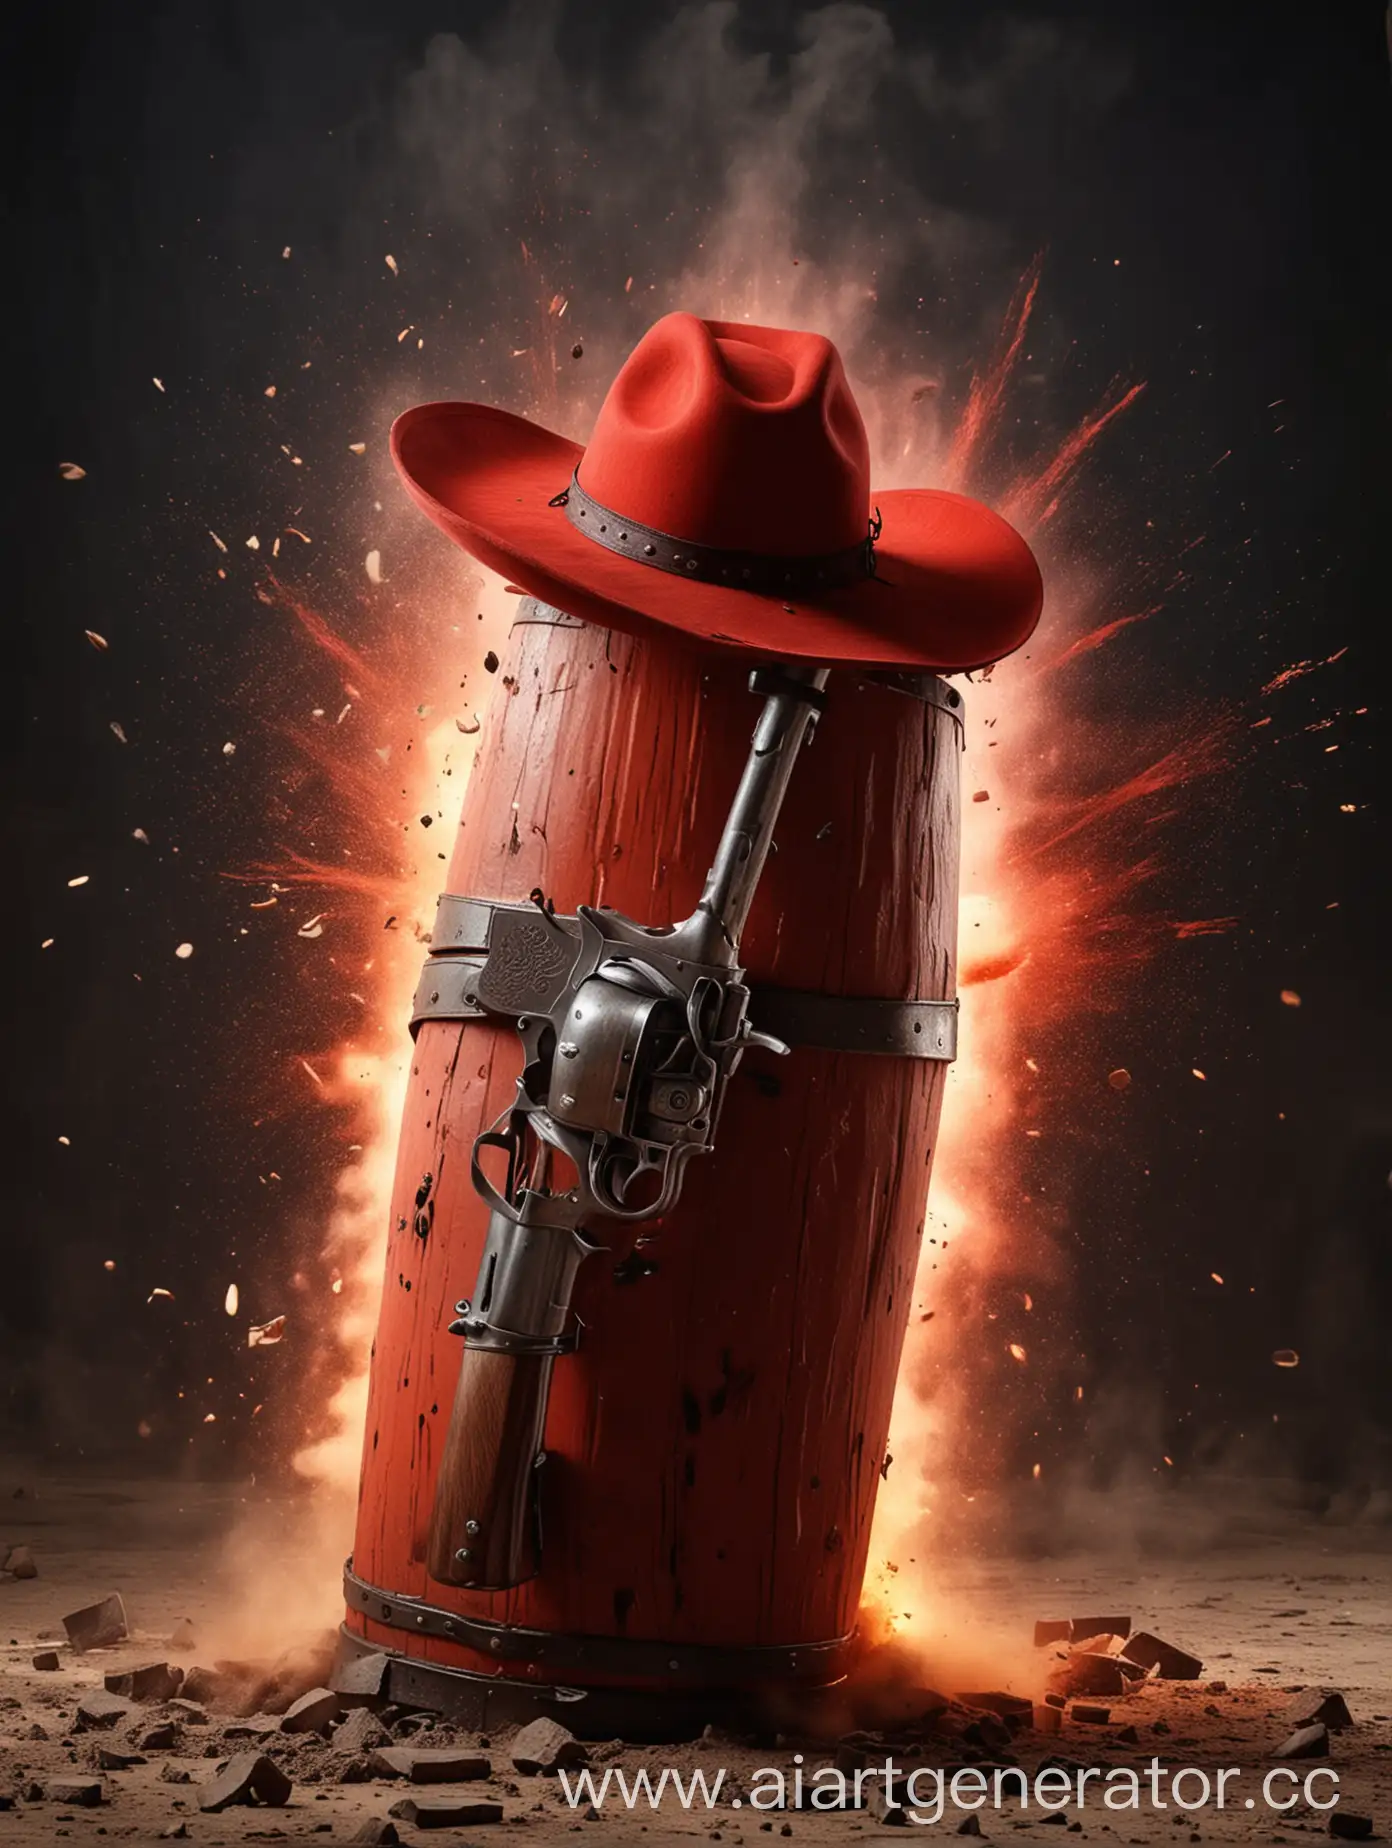 Explosive-Cowboy-with-Enormous-Revolver-Emerges-from-Red-Barrel